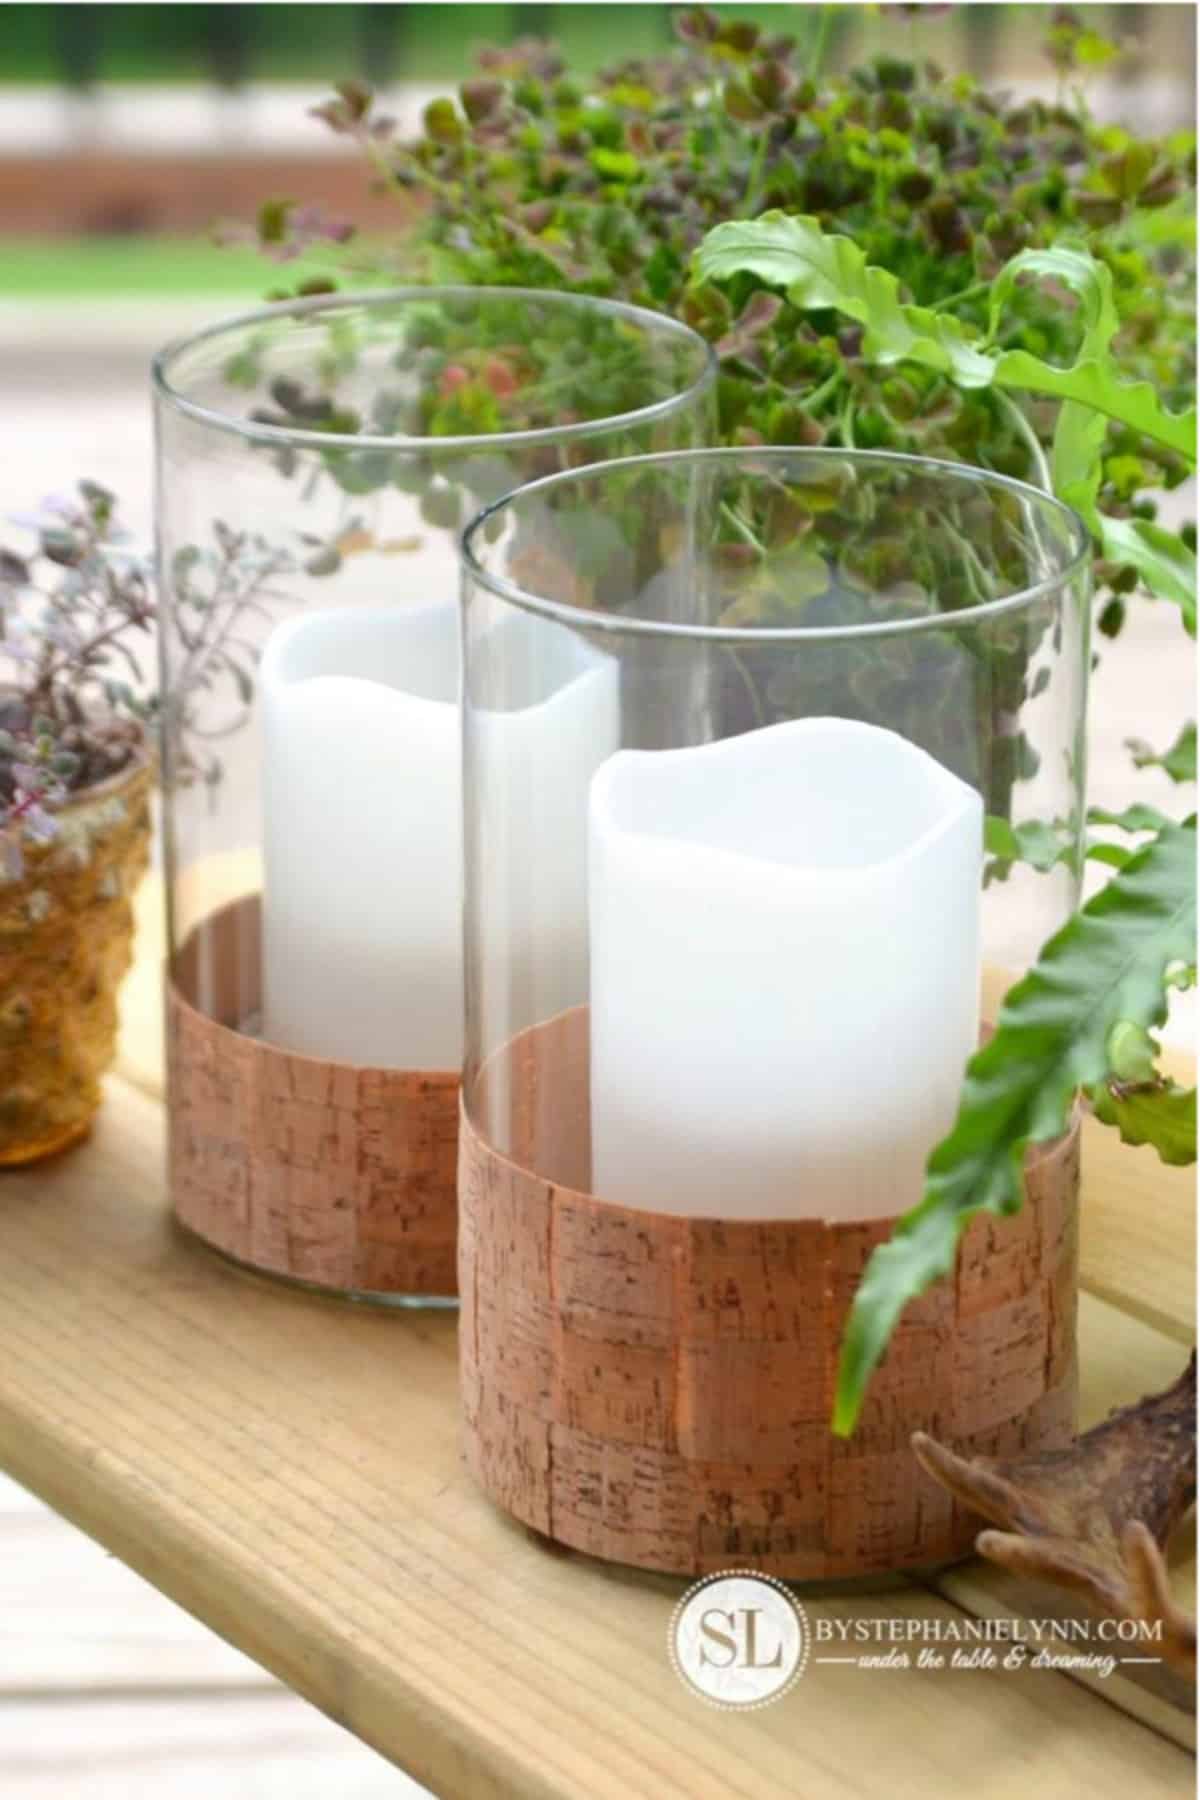 The DIY Glass Hurricane Candle Holder